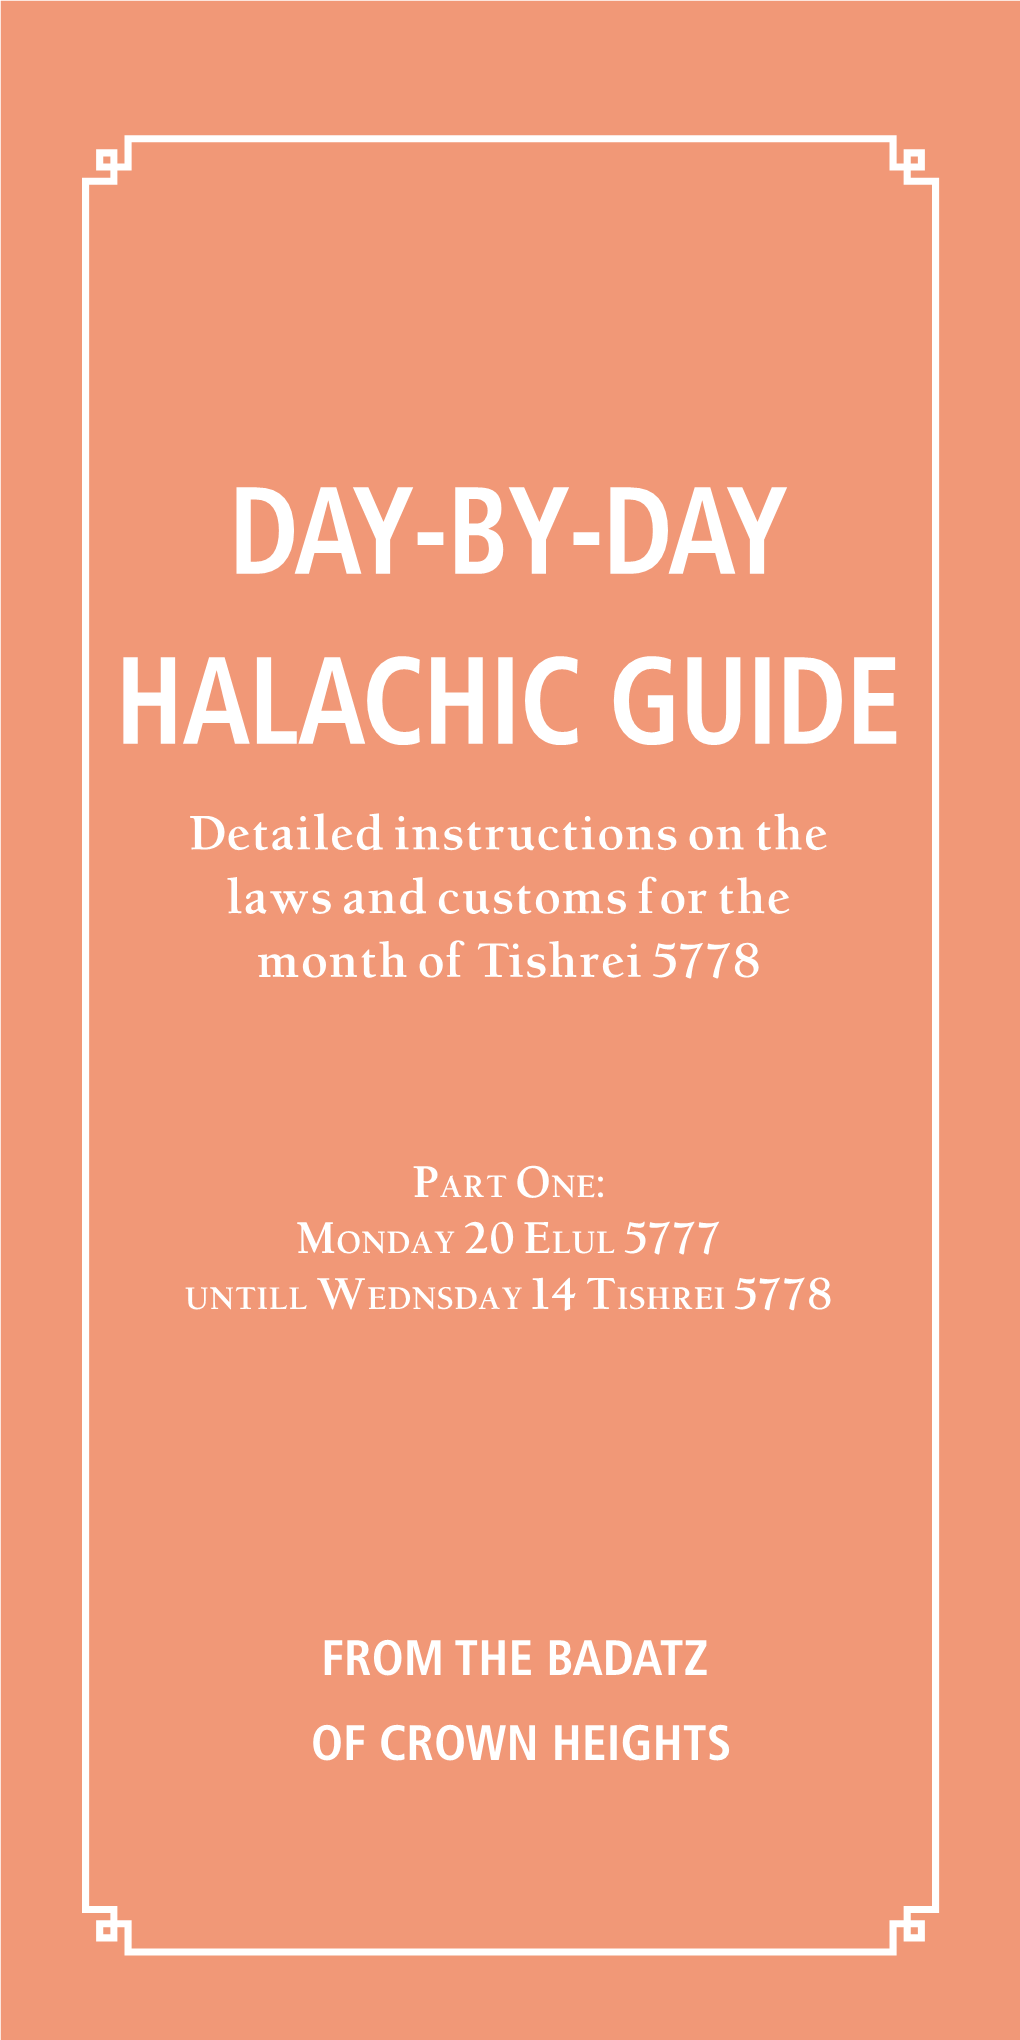 DAY-BY-DAY HALACHIC GUIDE Detailed Instructions on the Laws and Customs for the Month of Tishrei 5778